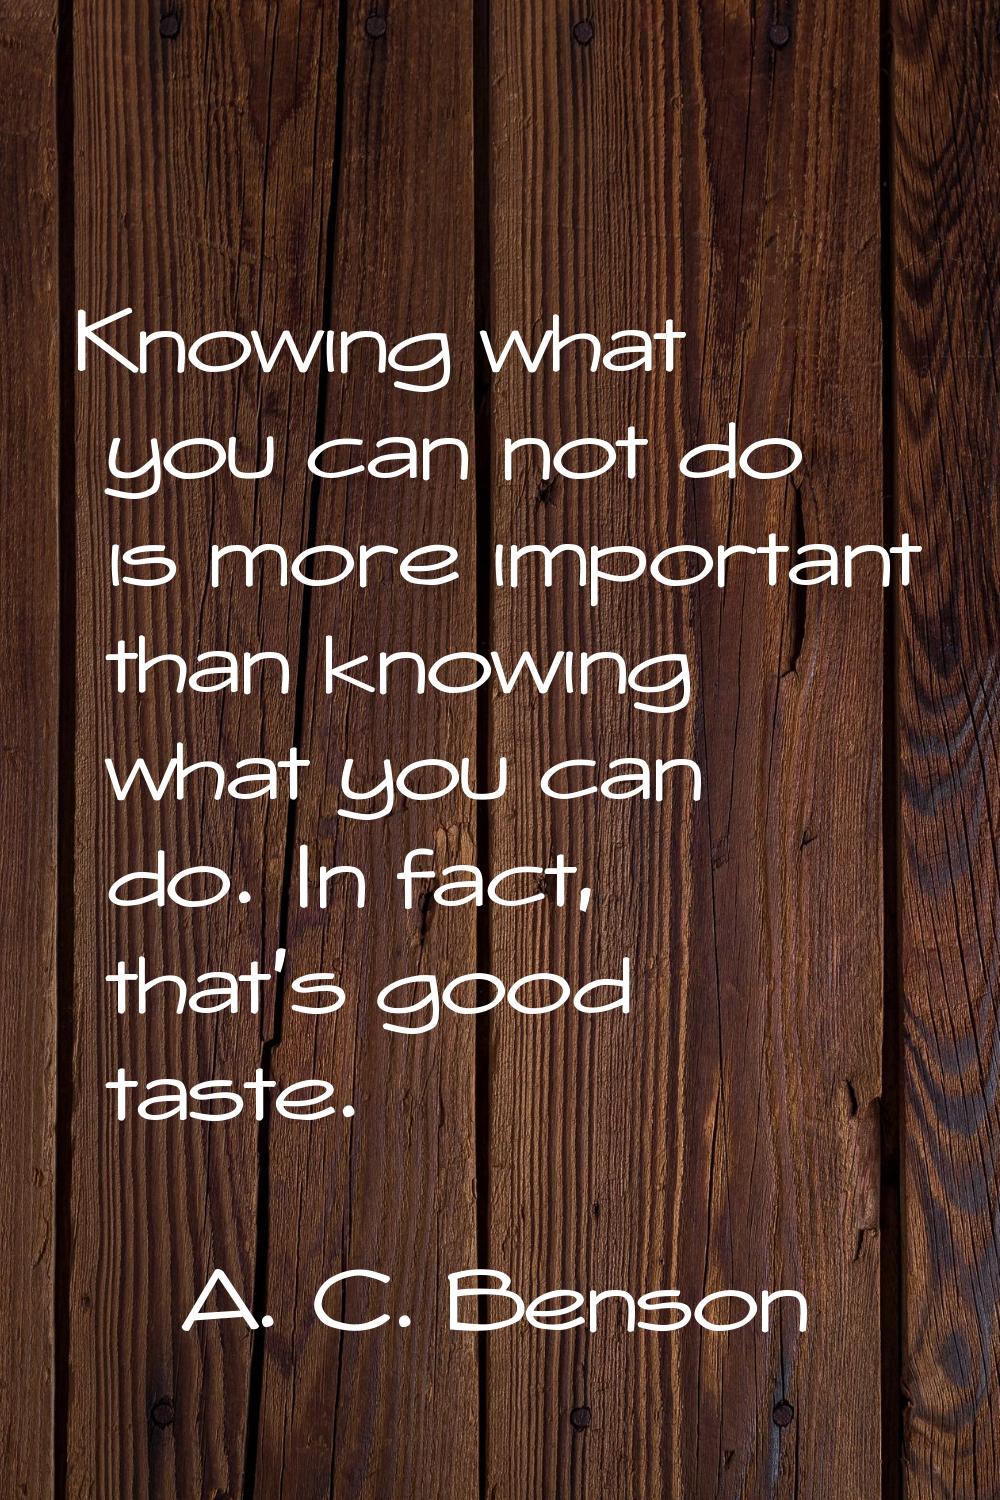 Knowing what you can not do is more important than knowing what you can do. In fact, that's good ta